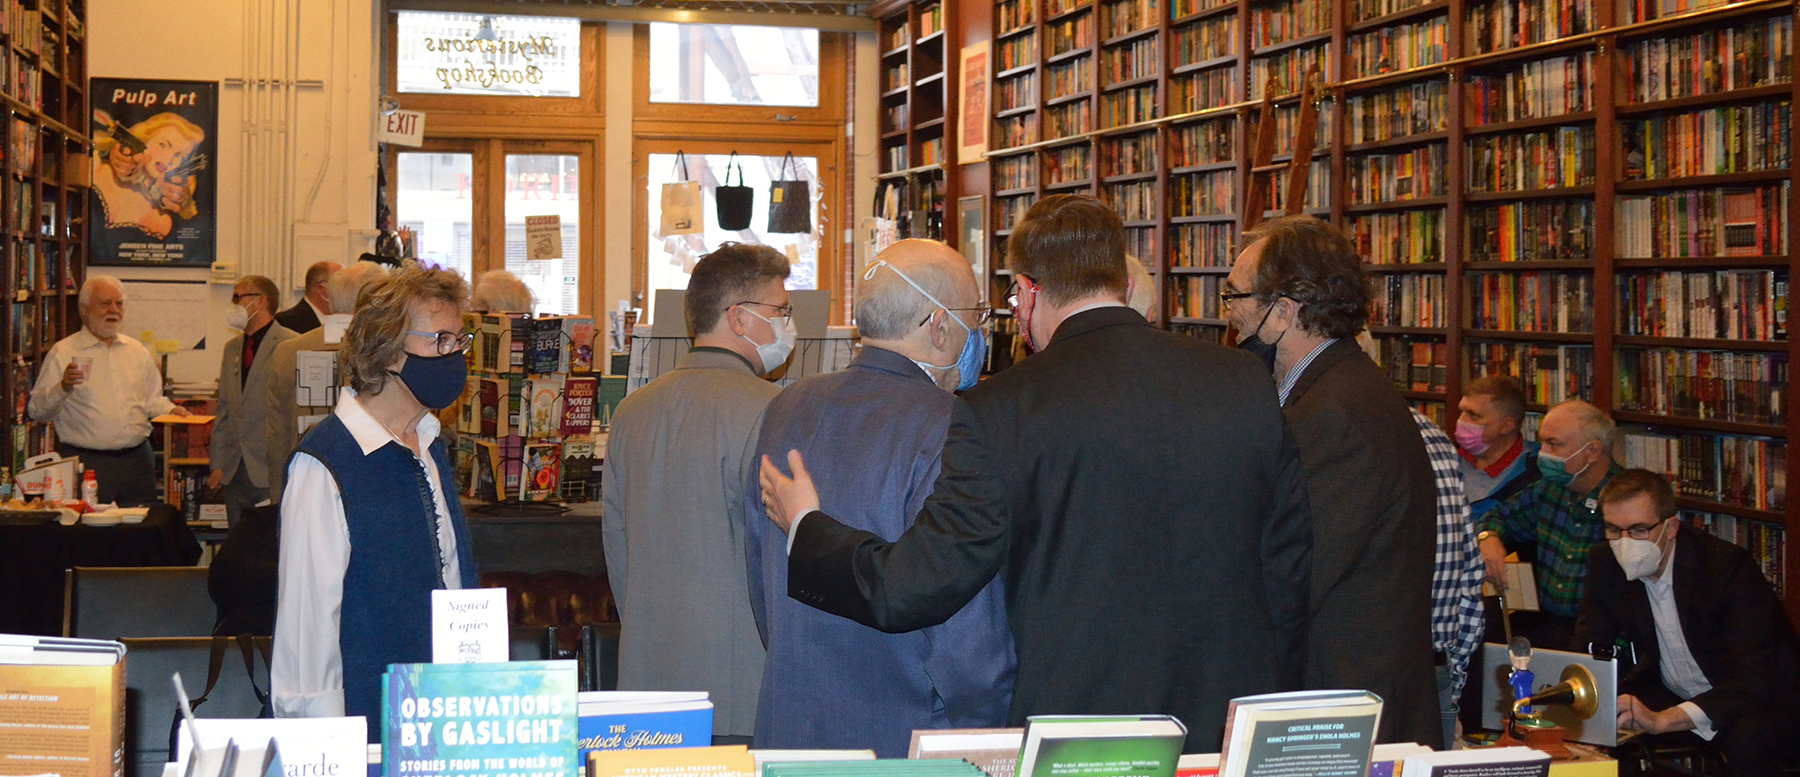 inside The Mysterious Bookshop during the 2022 Doylean Honors event